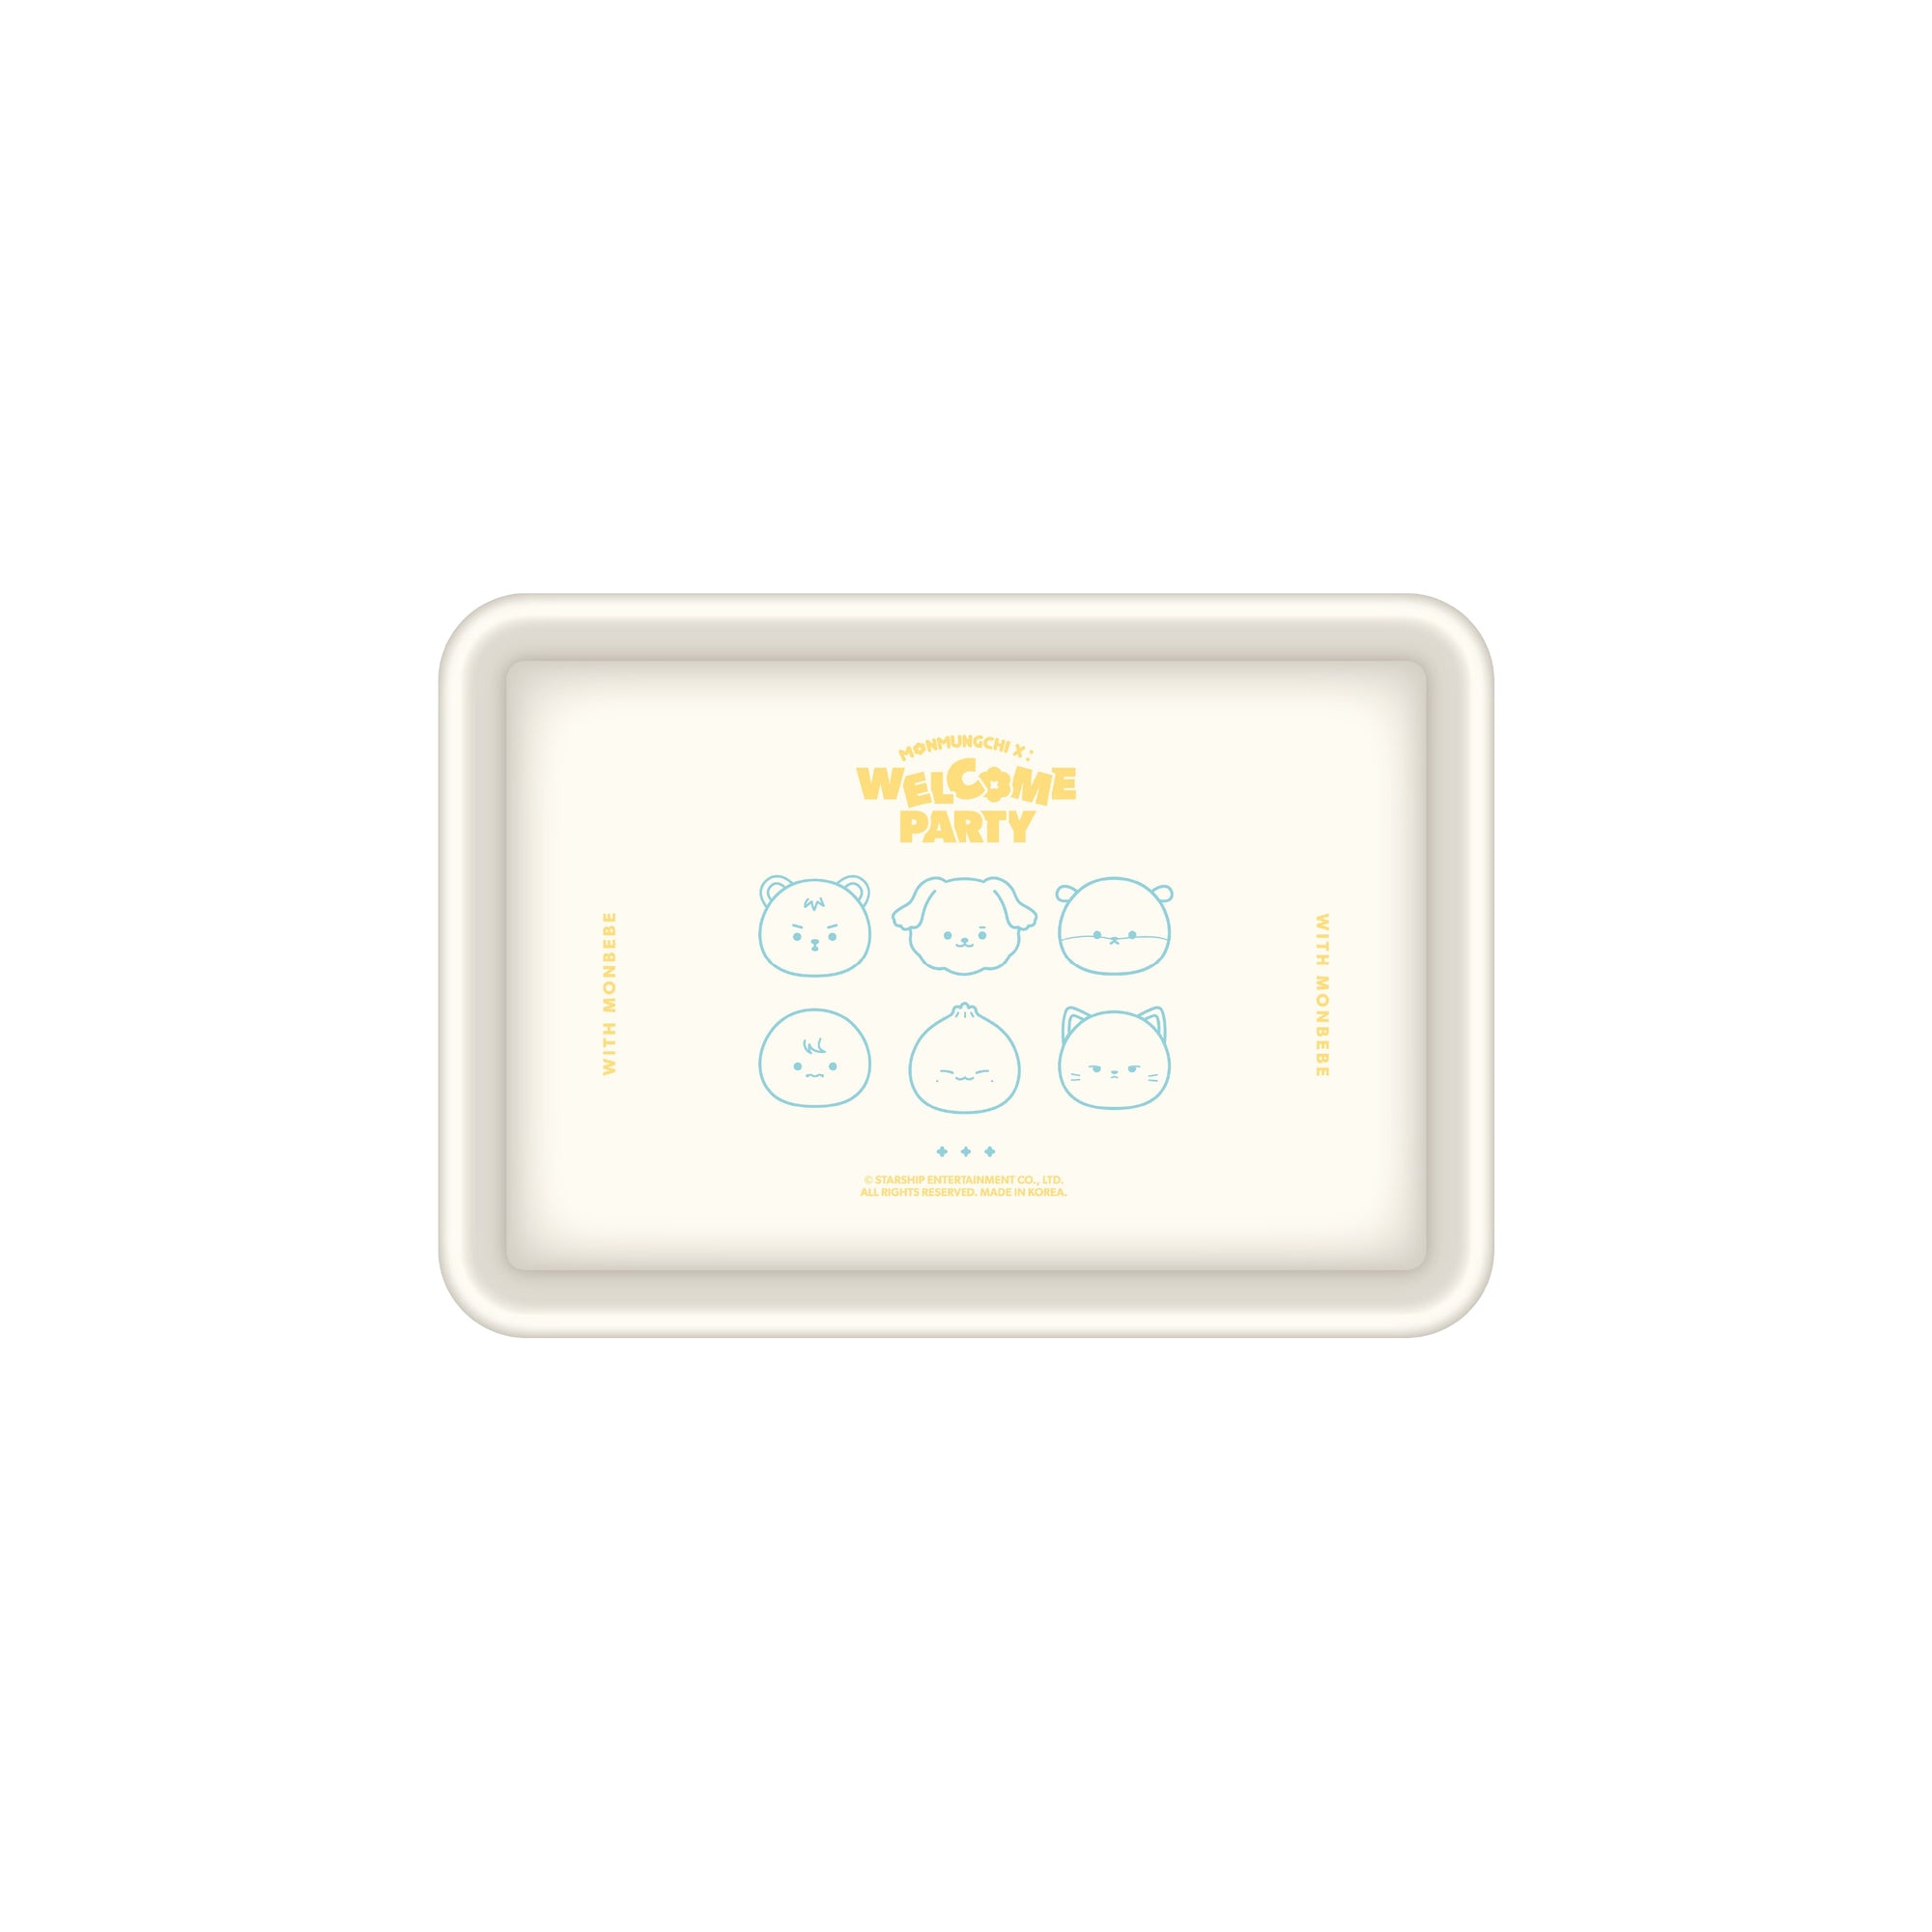 MONSTA X - MONMUGCHI X : WELCOM PARTY POP UP STORE OFFICIAL MD MONMUNGCHI X TRAY - COKODIVE